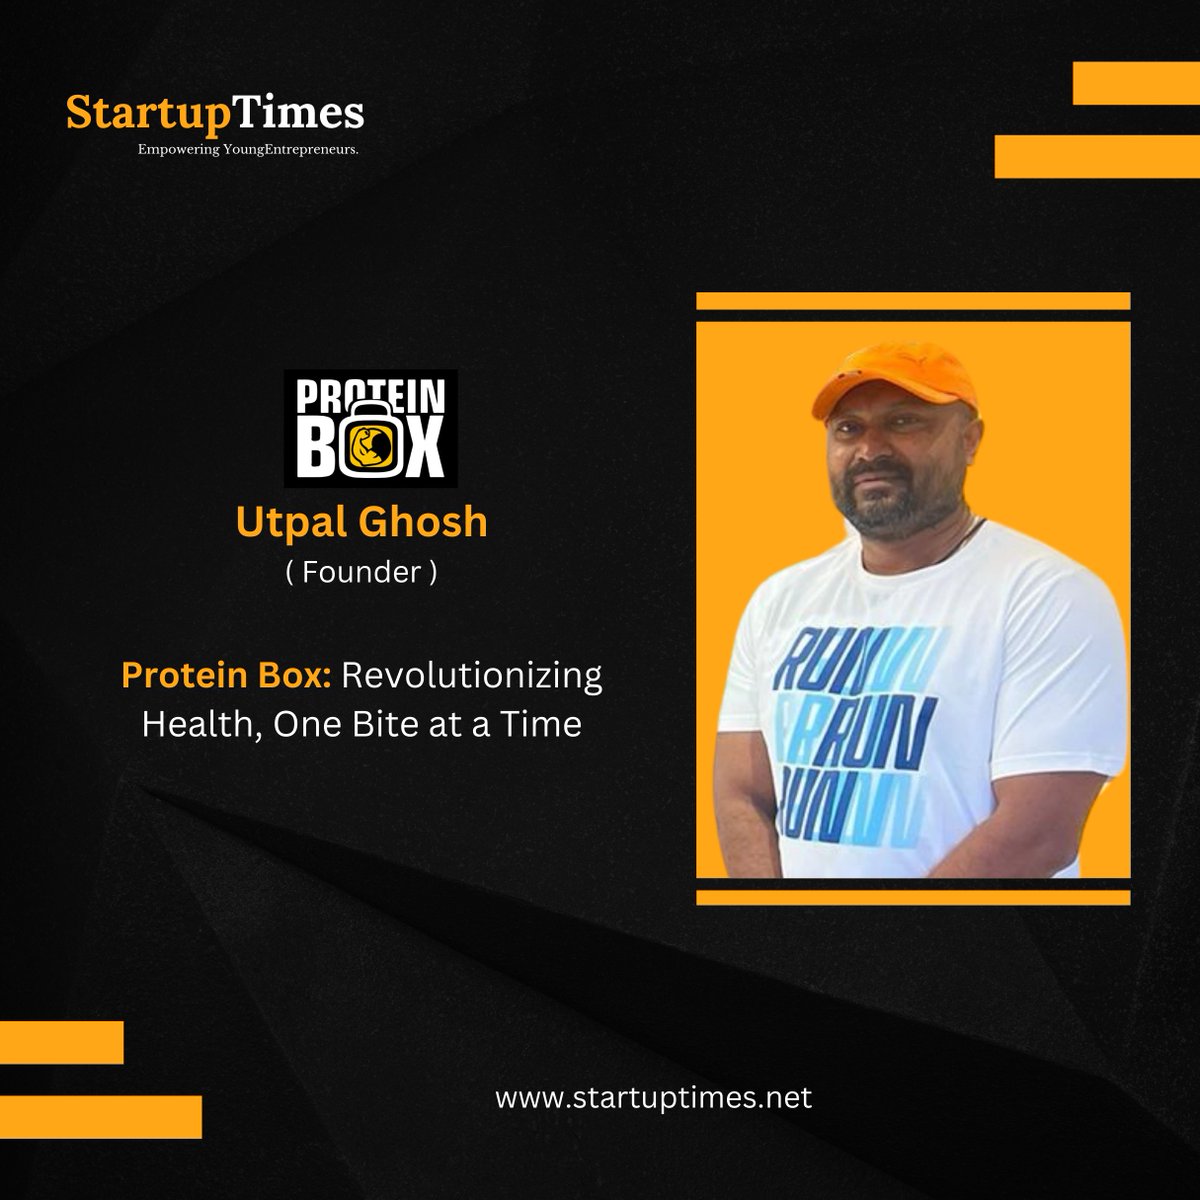 Protein Box: Utpal Ghosh's health revolution offers nutritious meals, resilience, and nationwide expansion. @utpalghosh30 #proteinbox #utpalghosh #founderstory